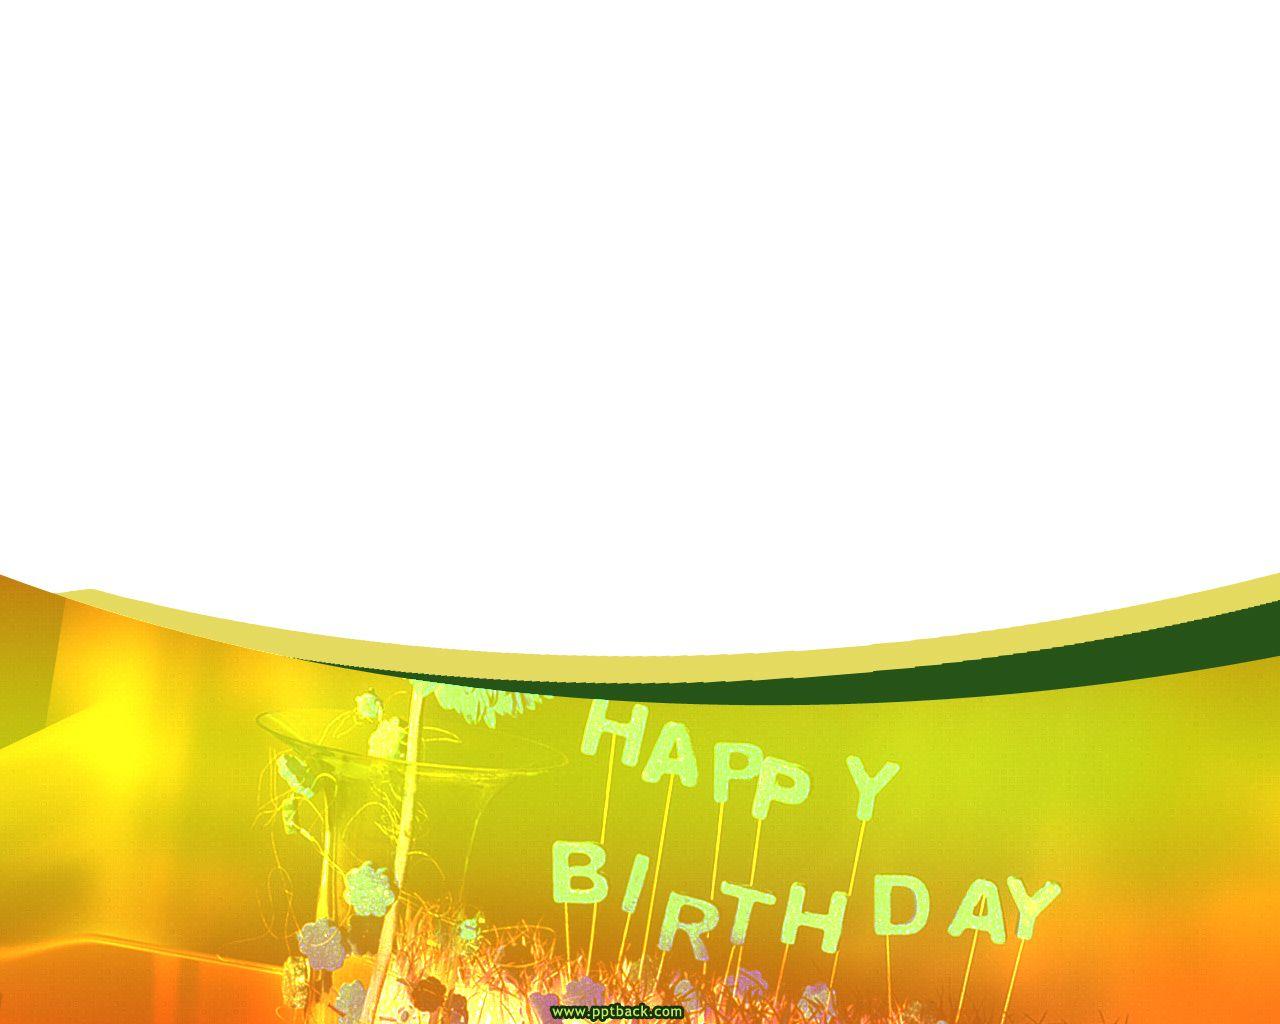 Happy Birthday Free PPT Background for your PowerPoint